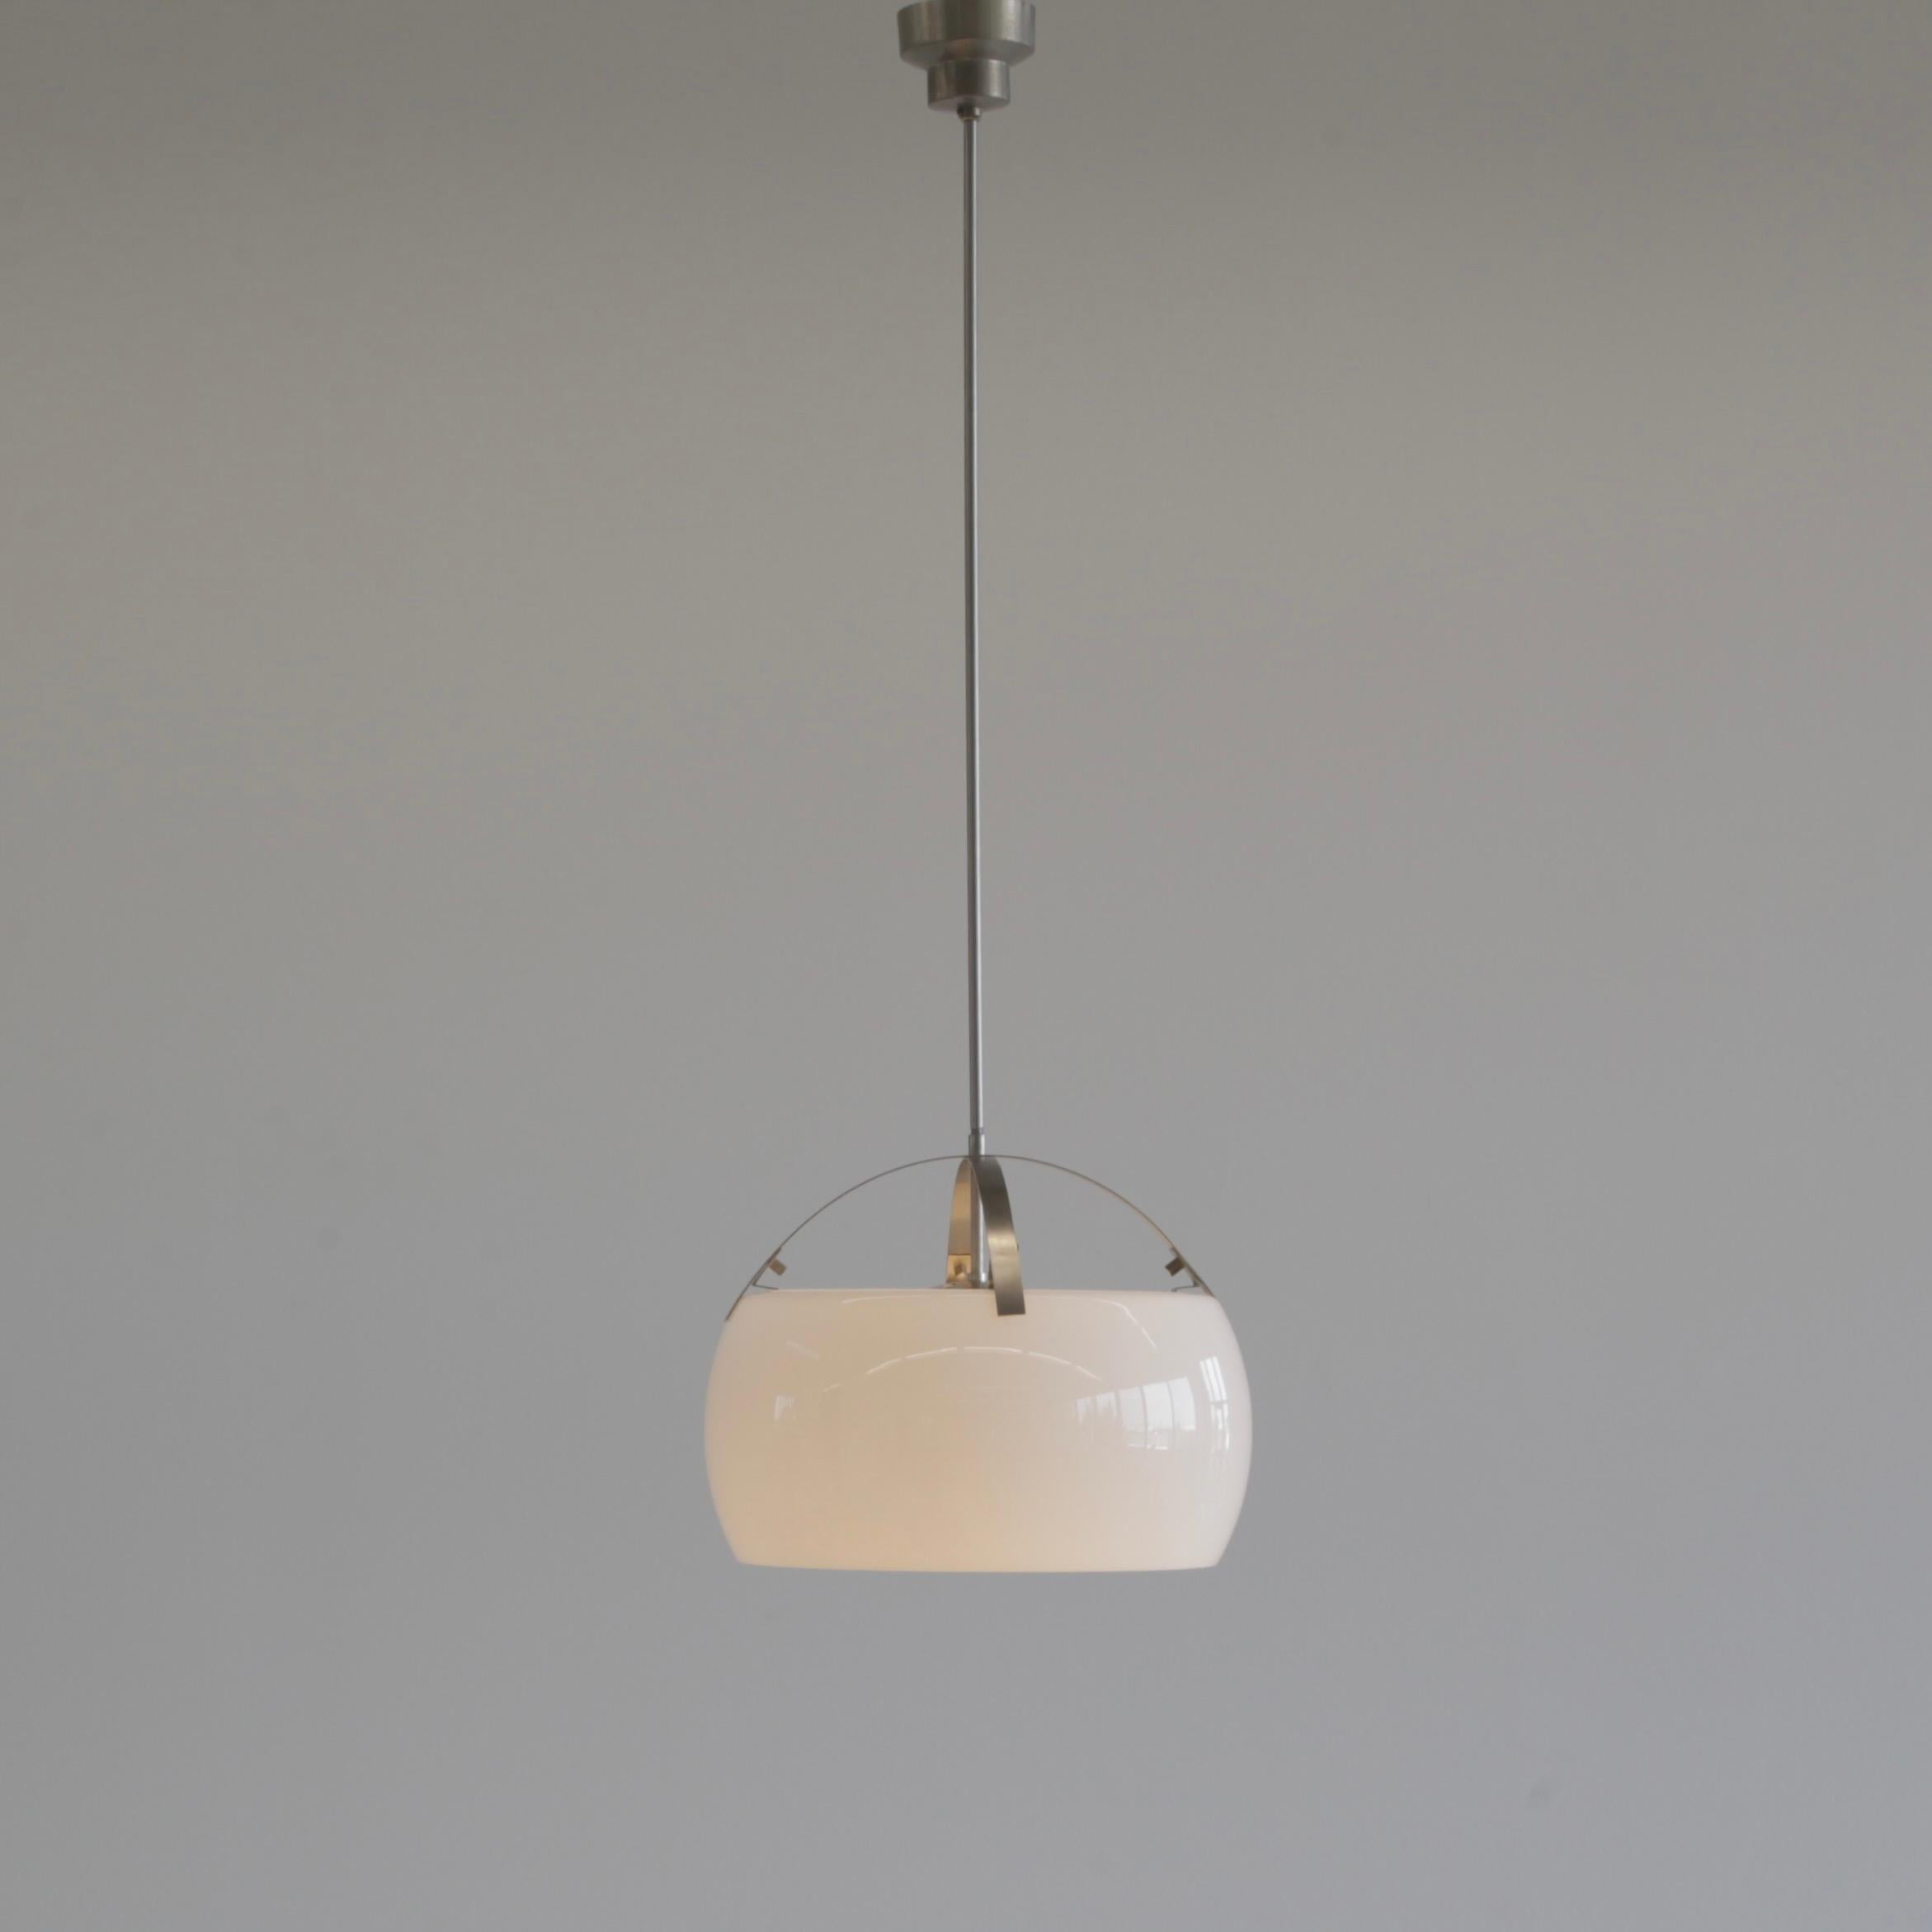 Hanging lamp designed by Vico Magistretti. Italy, Artemide, 1962.

The Omega lamp comprising of two separate pieces of opaline glass on a brushed metal frame.

We also have the XL size version (50 cm) available

Literature: Artemide catalogue